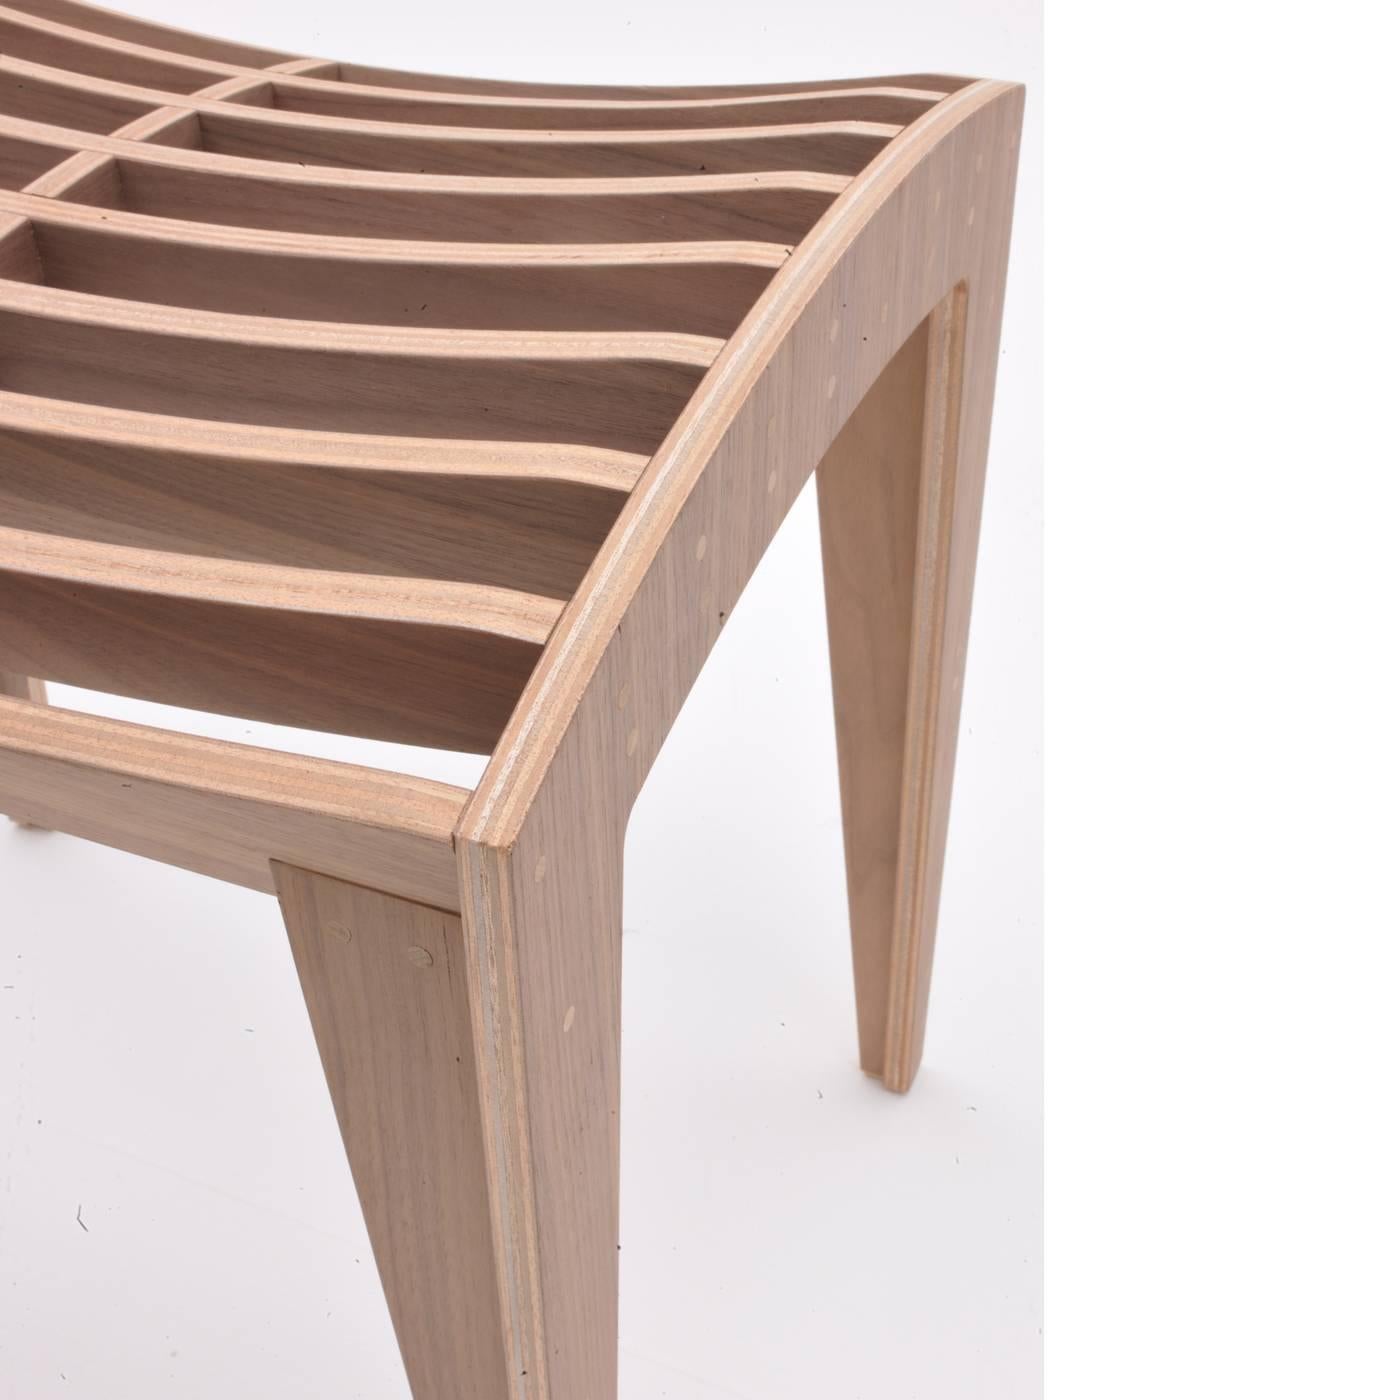 This striking piece was designed by Franco Poli for Morelato and it is the harmonious result of the mix between design and ideal choice of material. The seat is made of lists of wood assembled by single joints and pins and features a curved surface